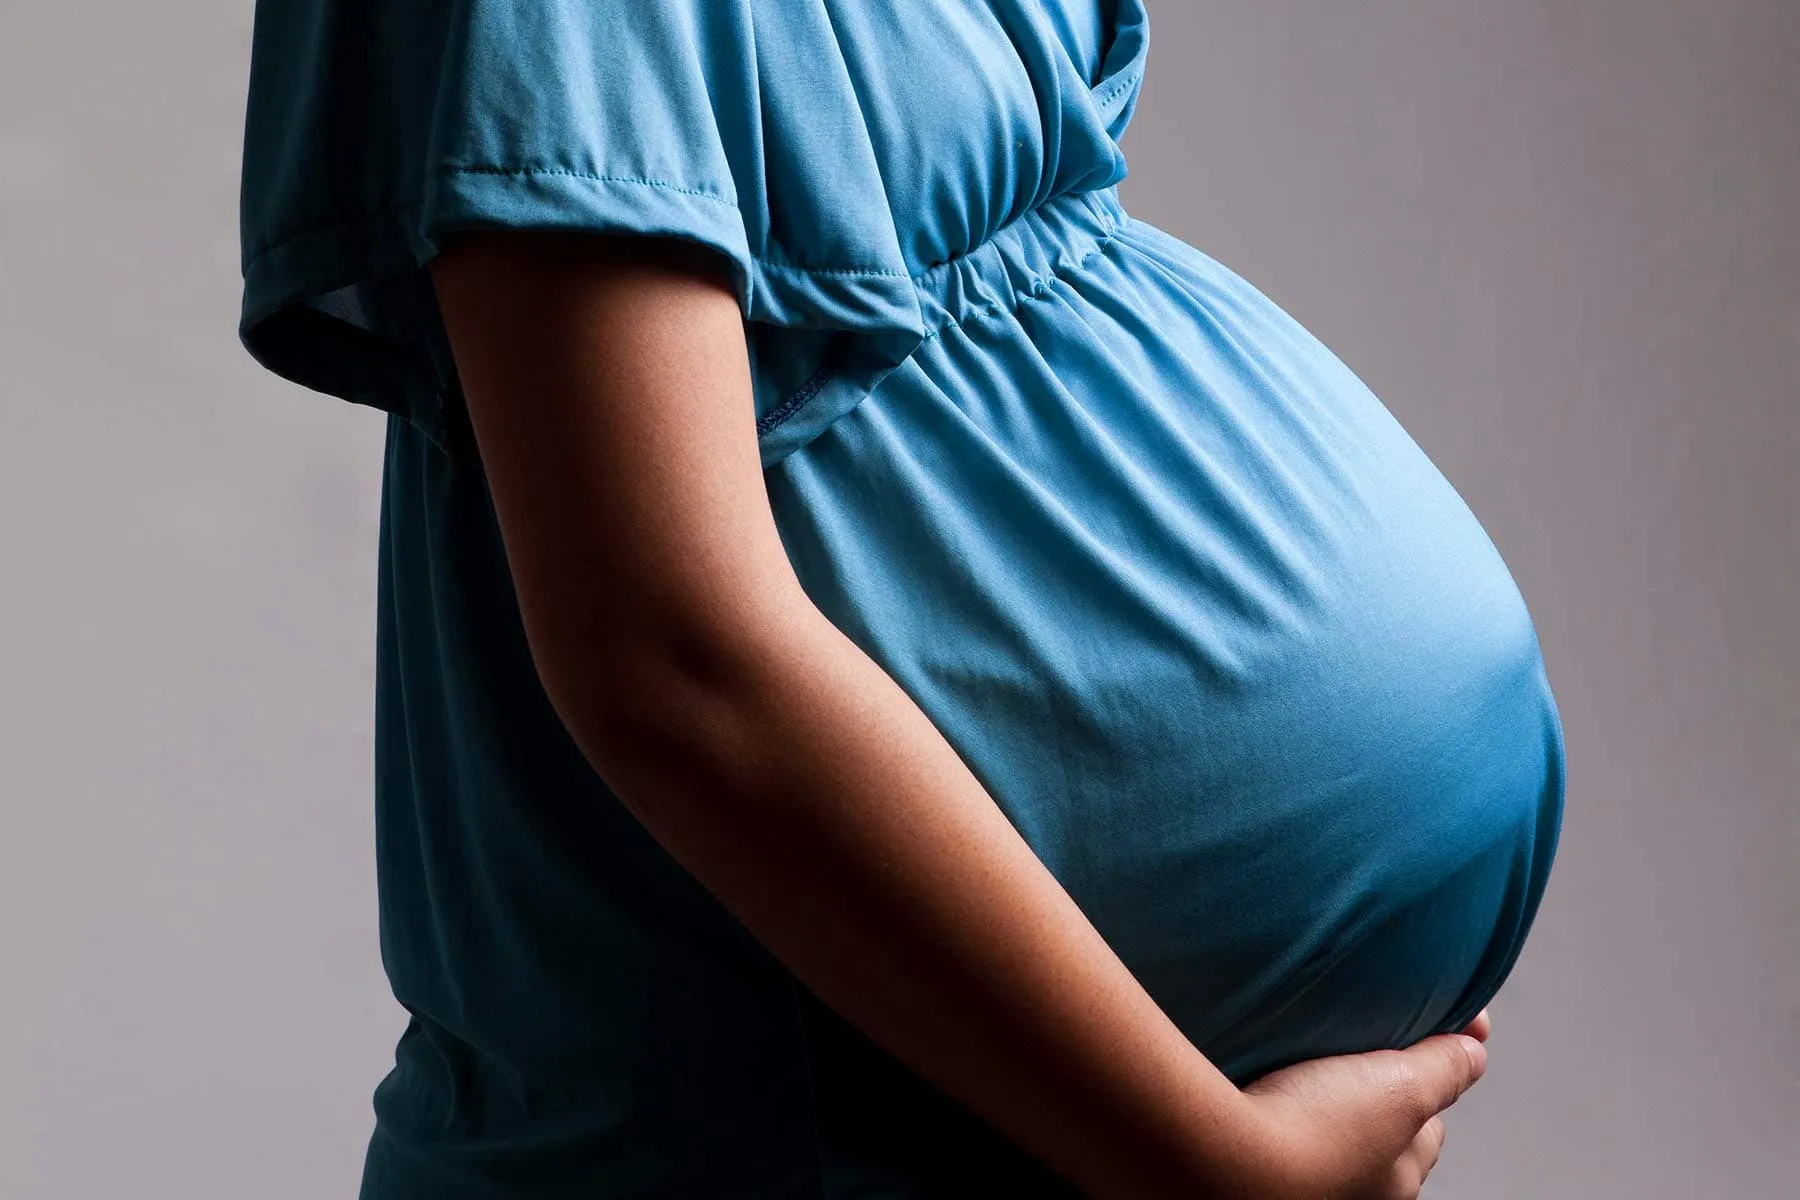 COVID dramatically increases risk of death during pregnancy: study